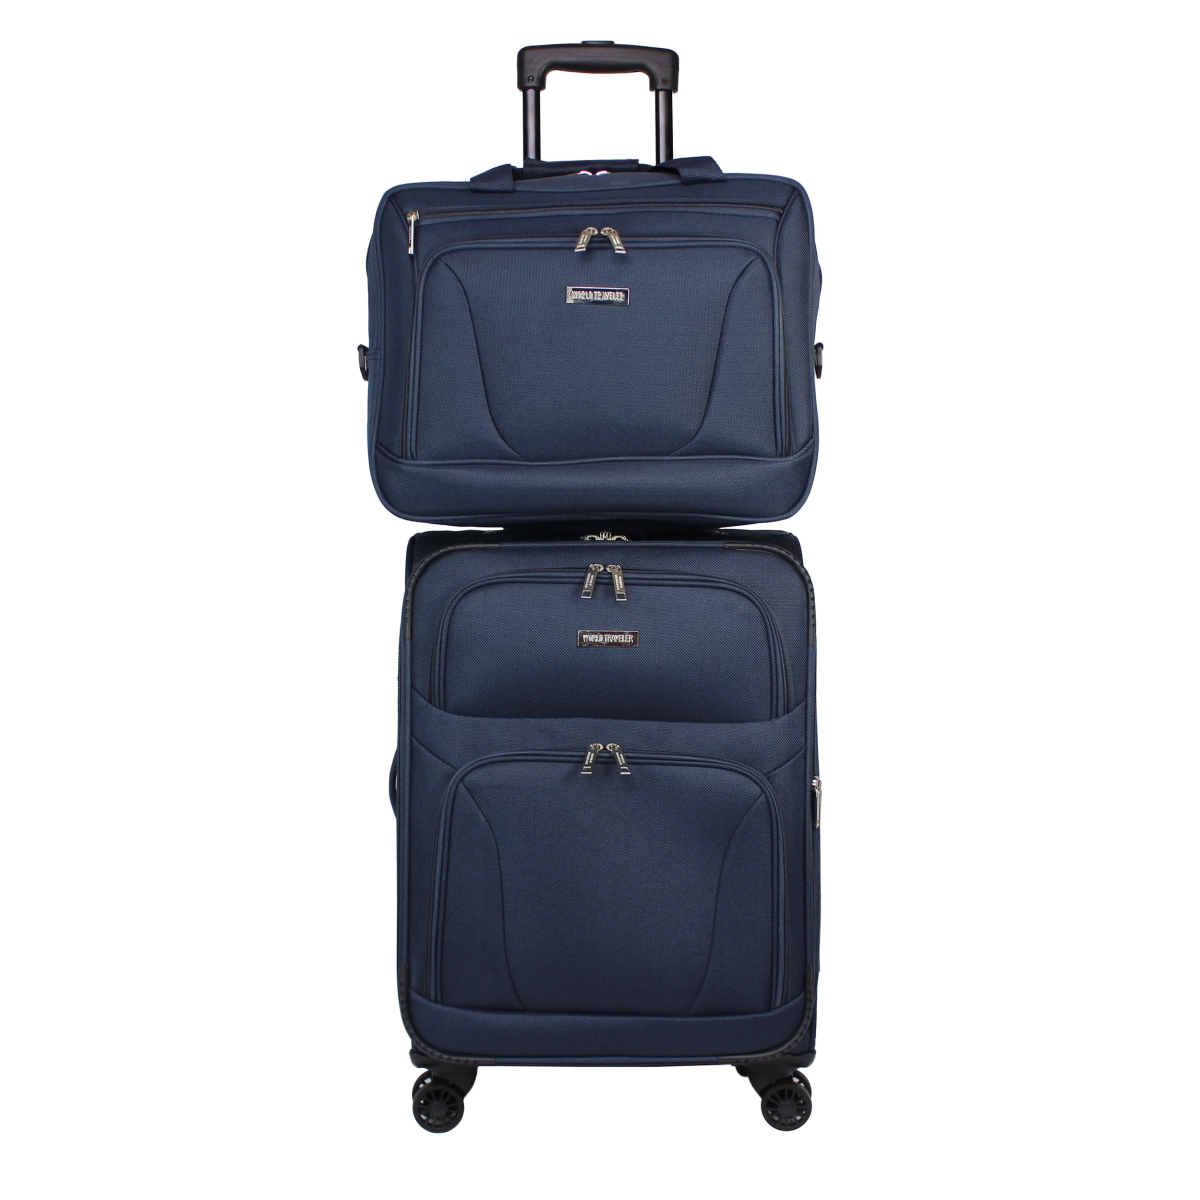 Wt100-2-black 2 Piece Embarque Collection Super Lightweight Carry On Spinner Luggage Set - Black